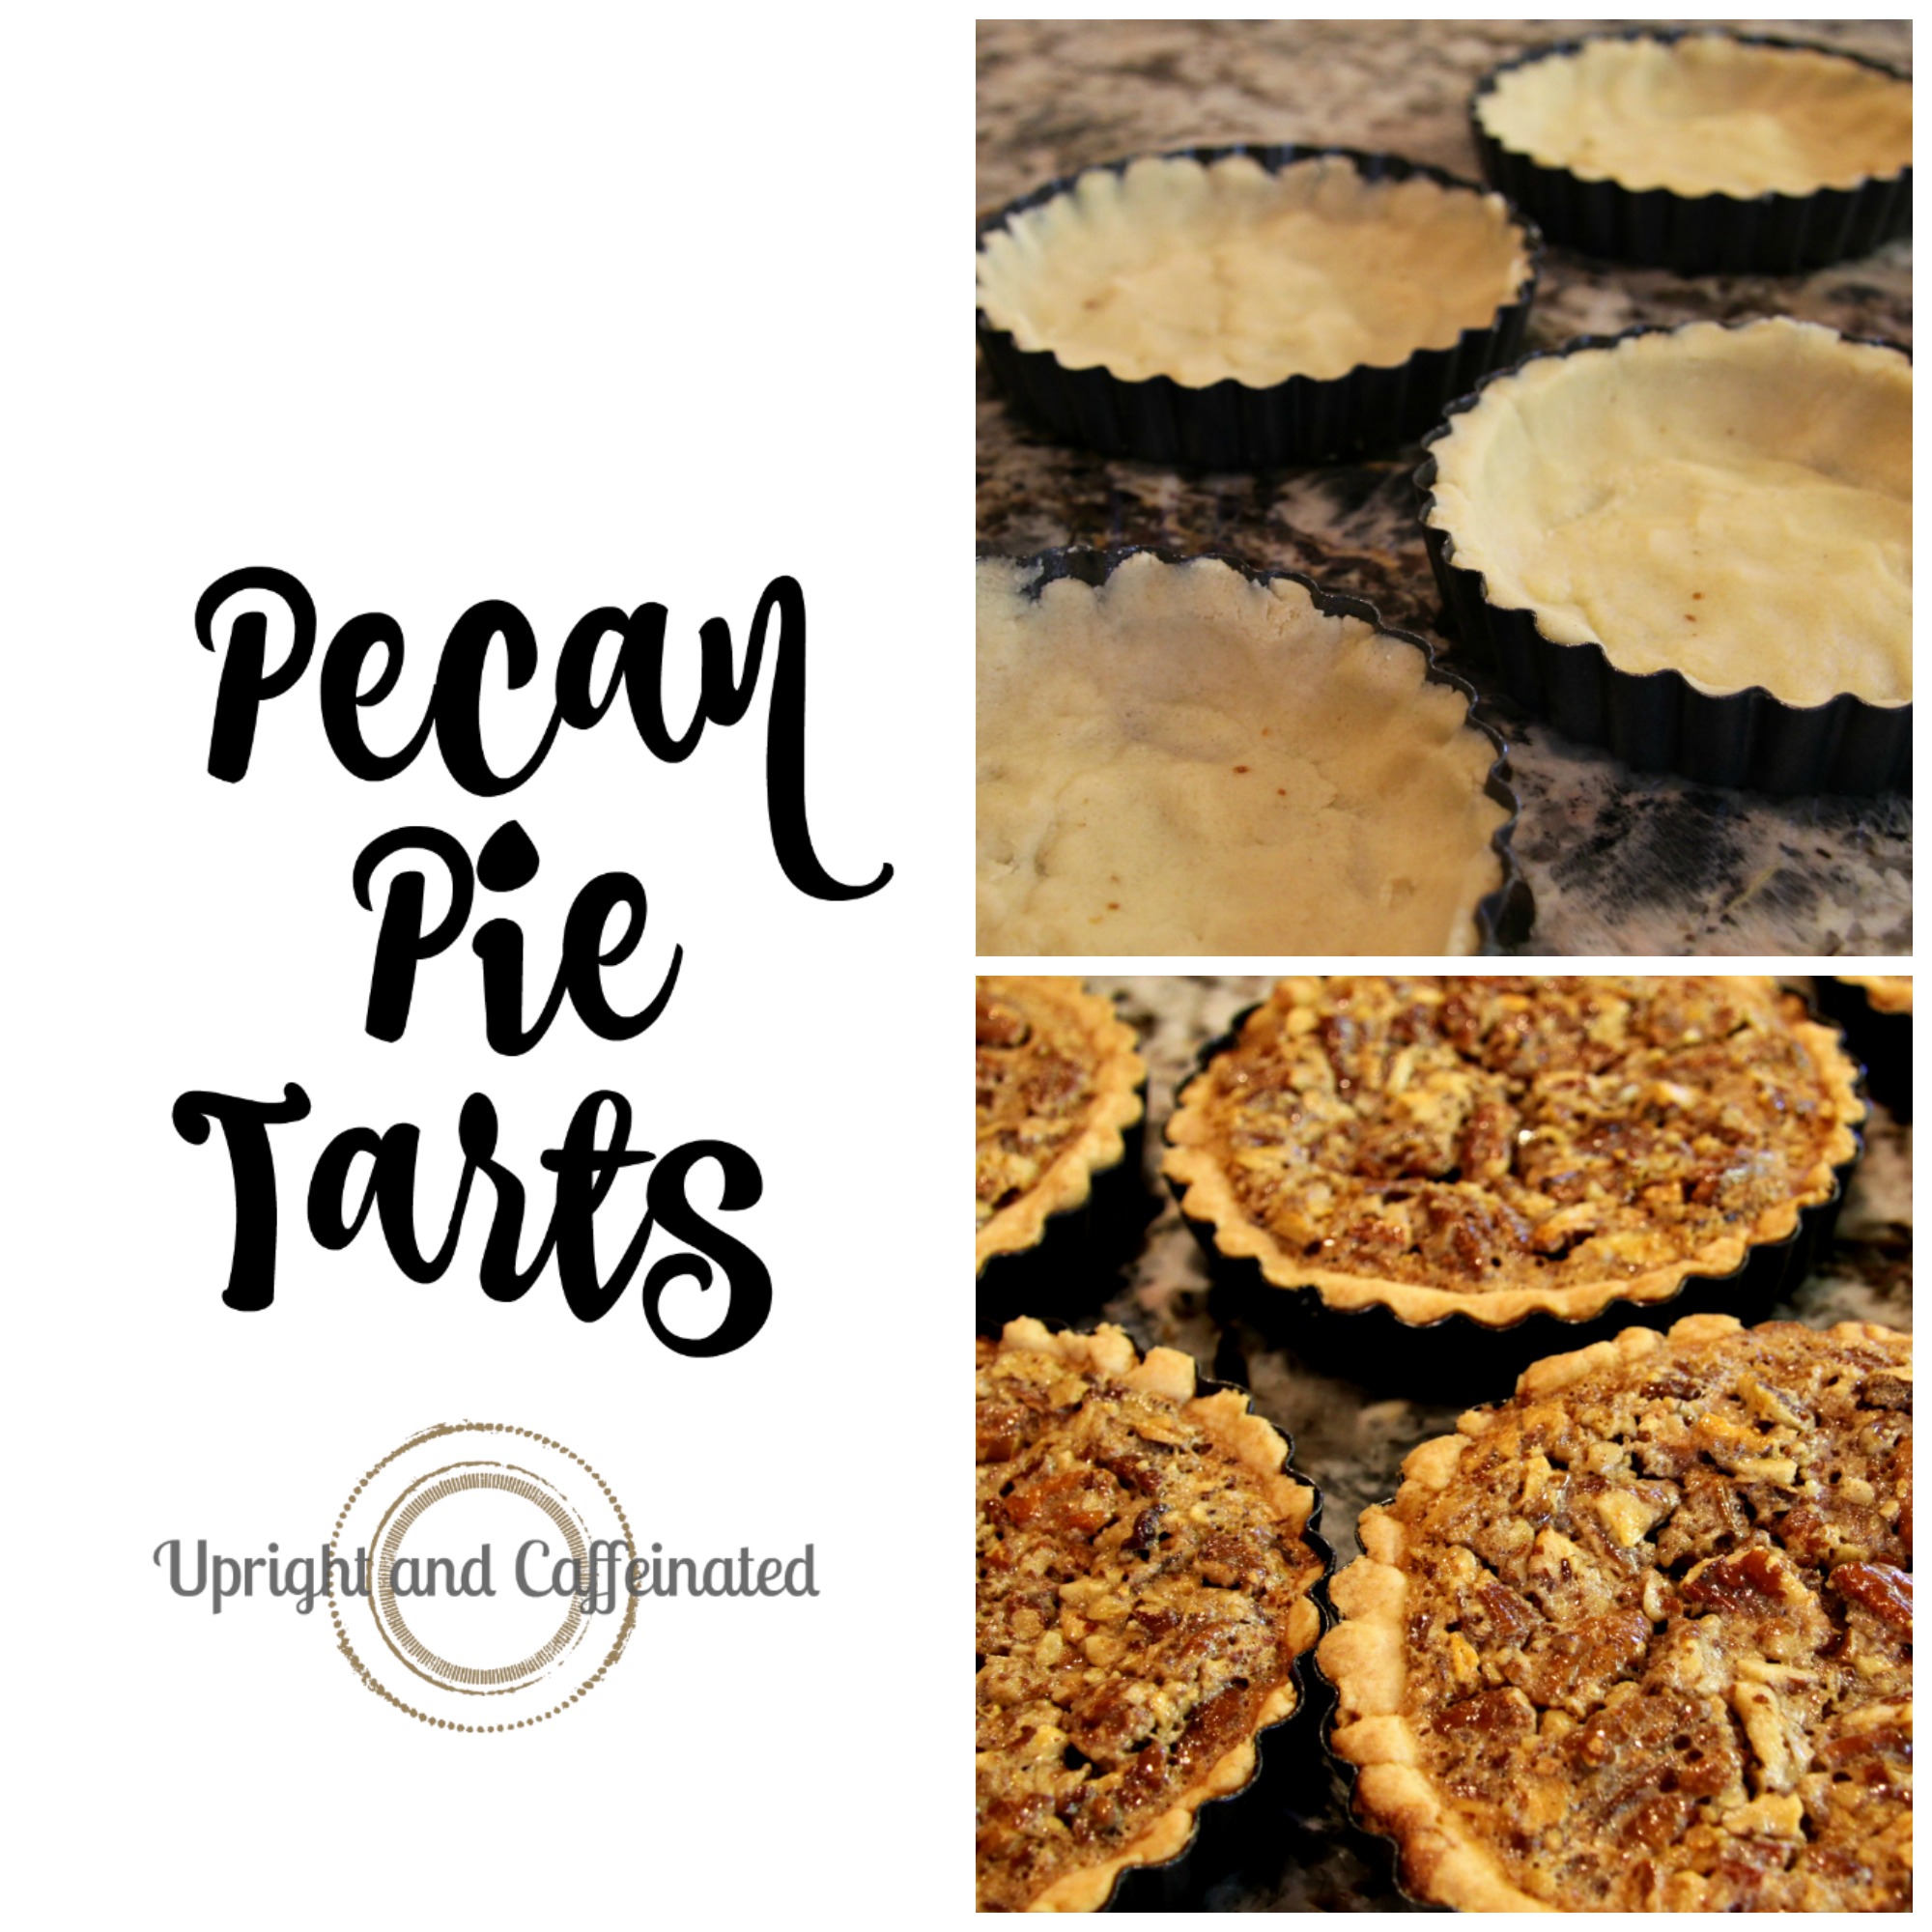 These Pecan Pie Tarts are fantastic and great gift ideas for teachers and friends!